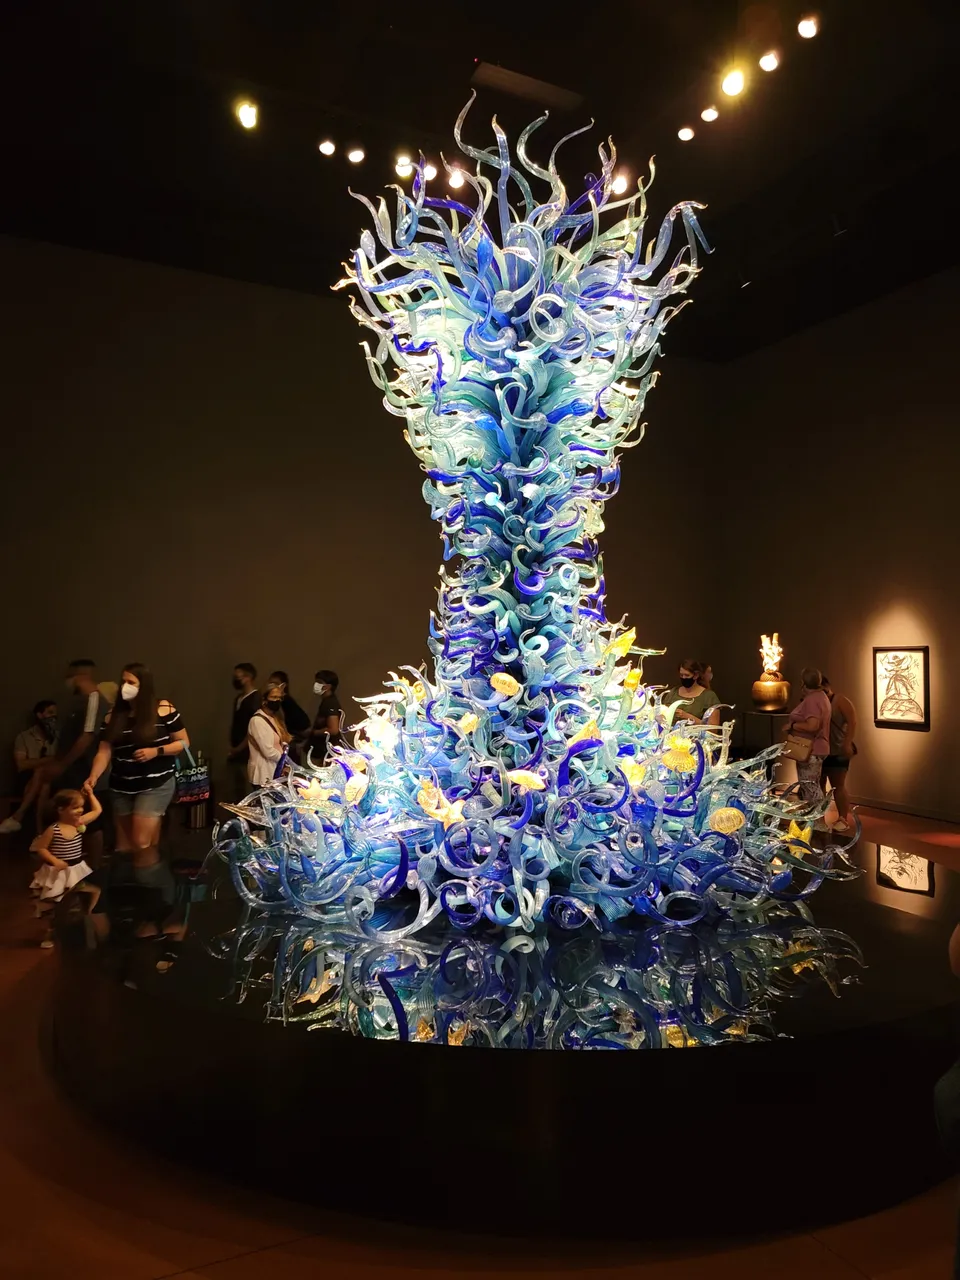 An amazing larger than life ocean based sculpture.